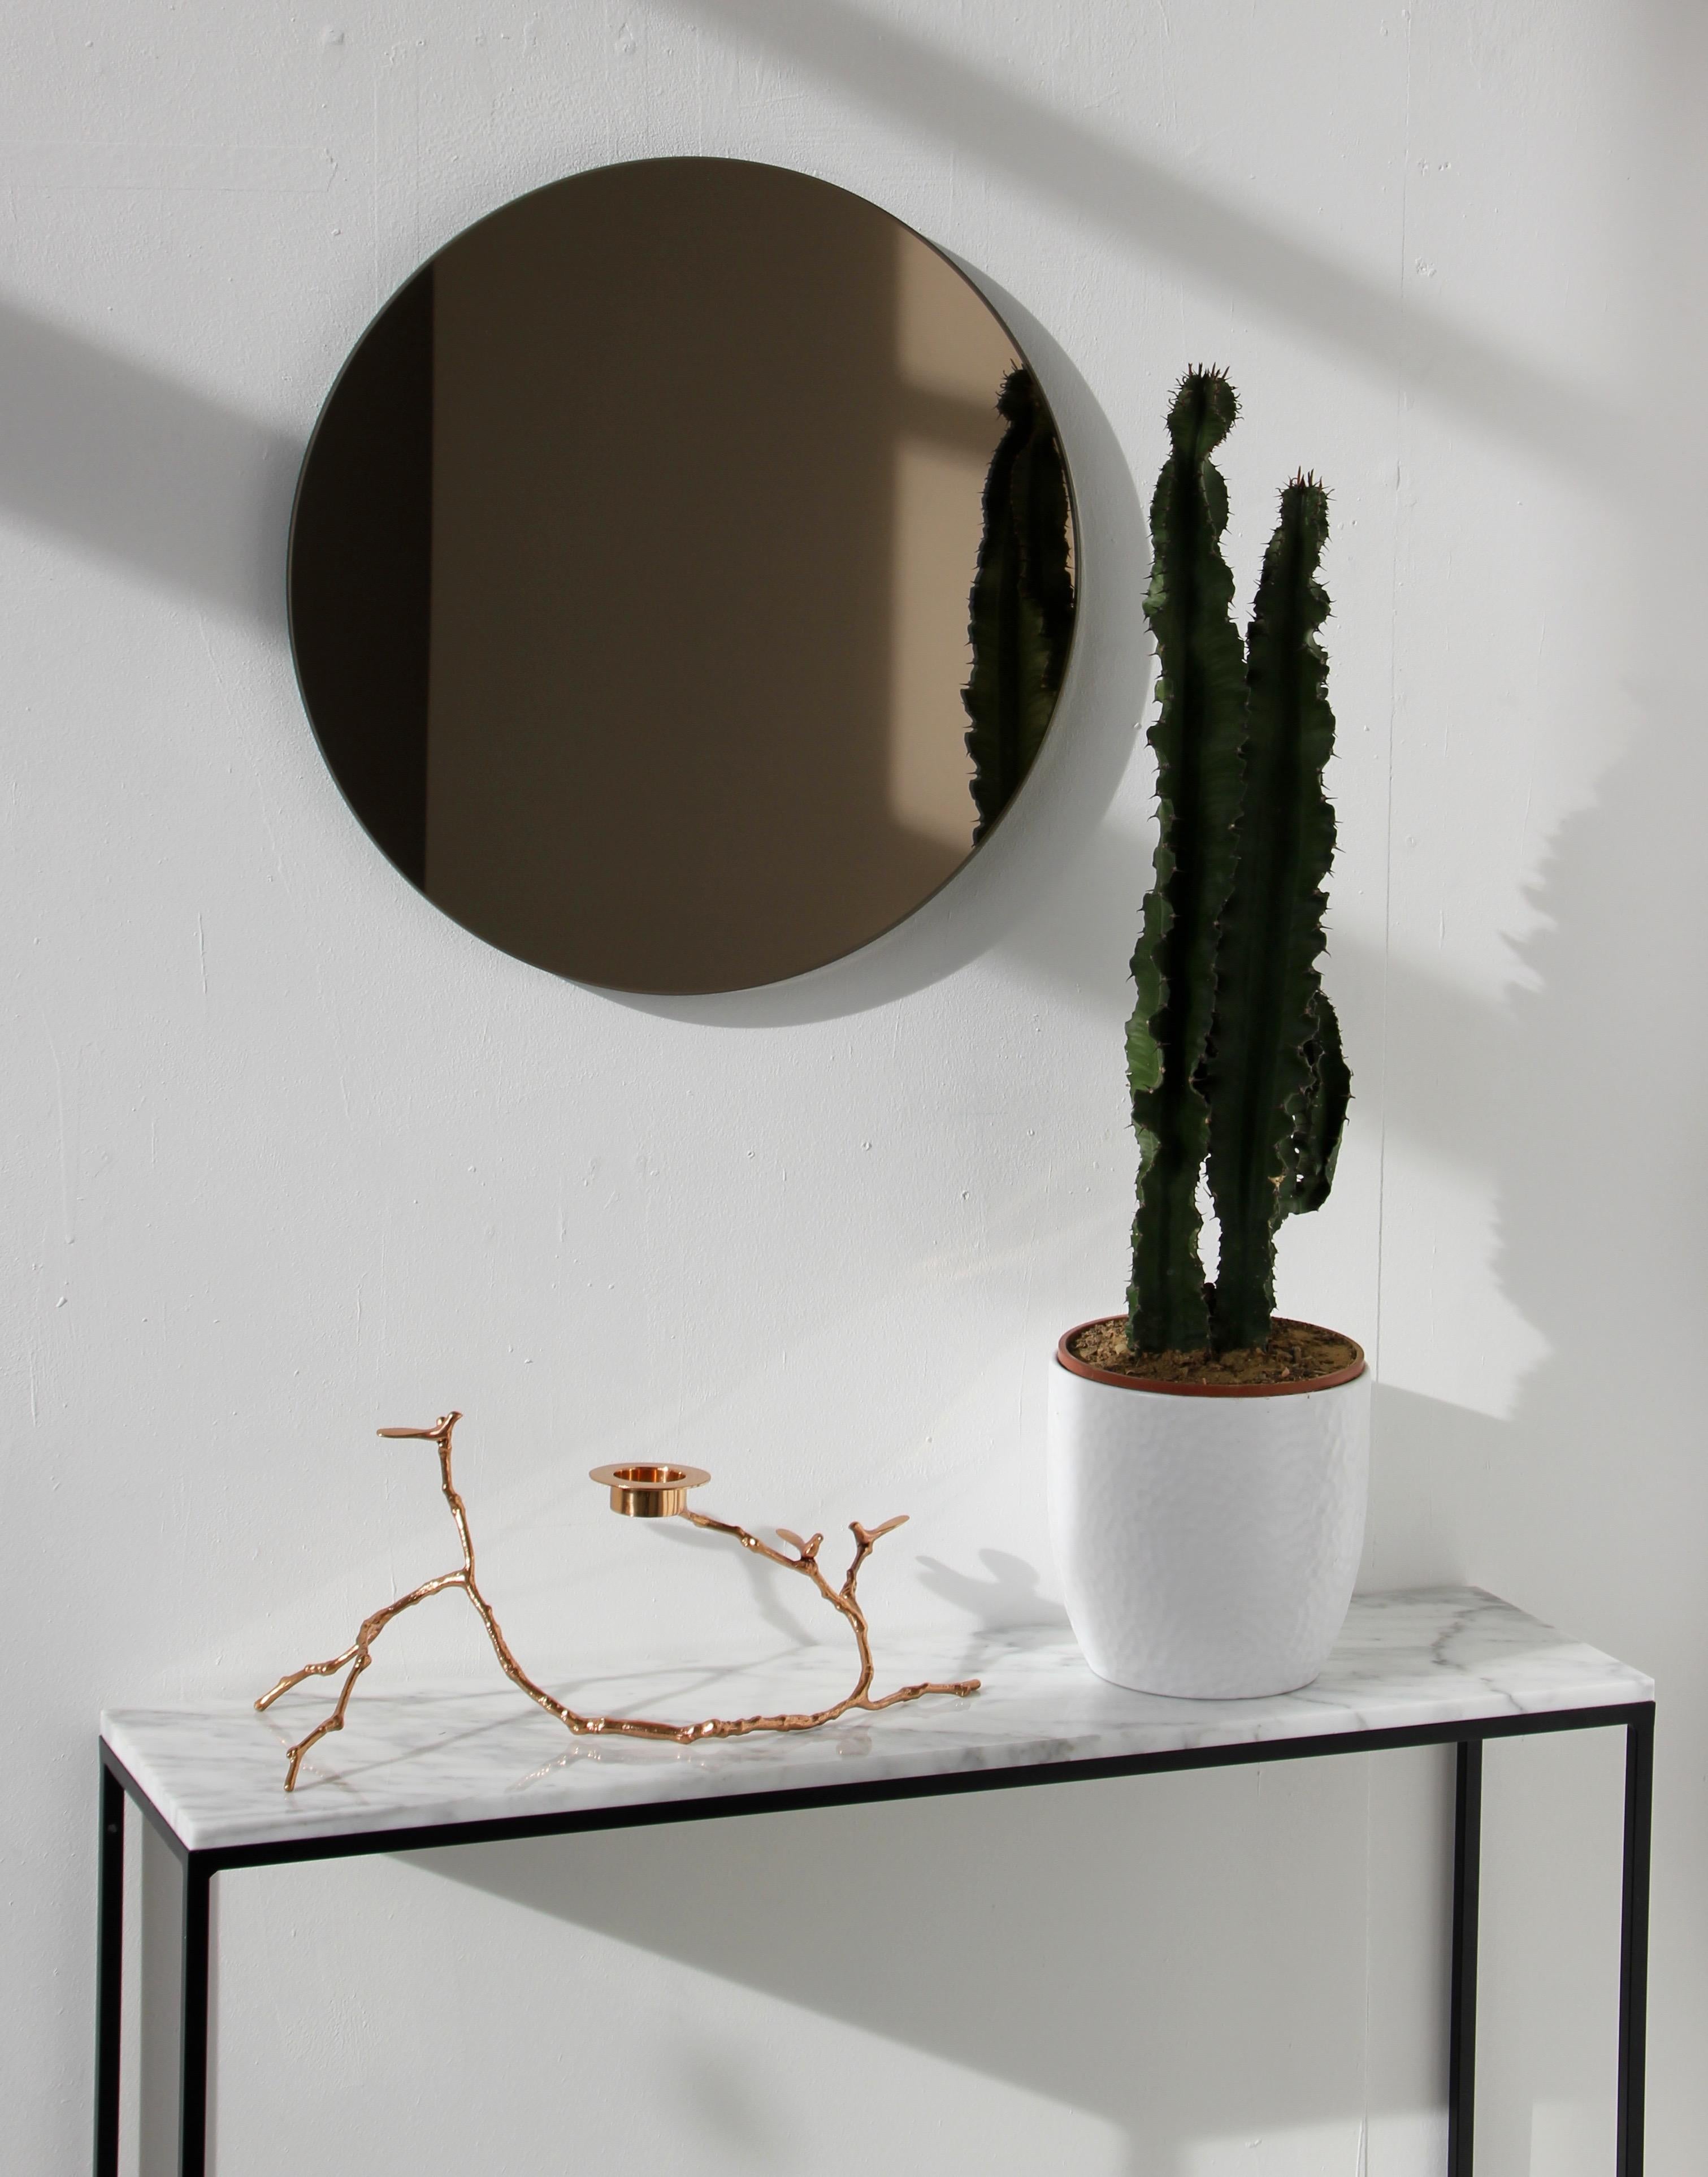 Orbis Bronze Tinted Round Minimalist Frameless Mirror Floating Effect, Regular In New Condition For Sale In London, GB